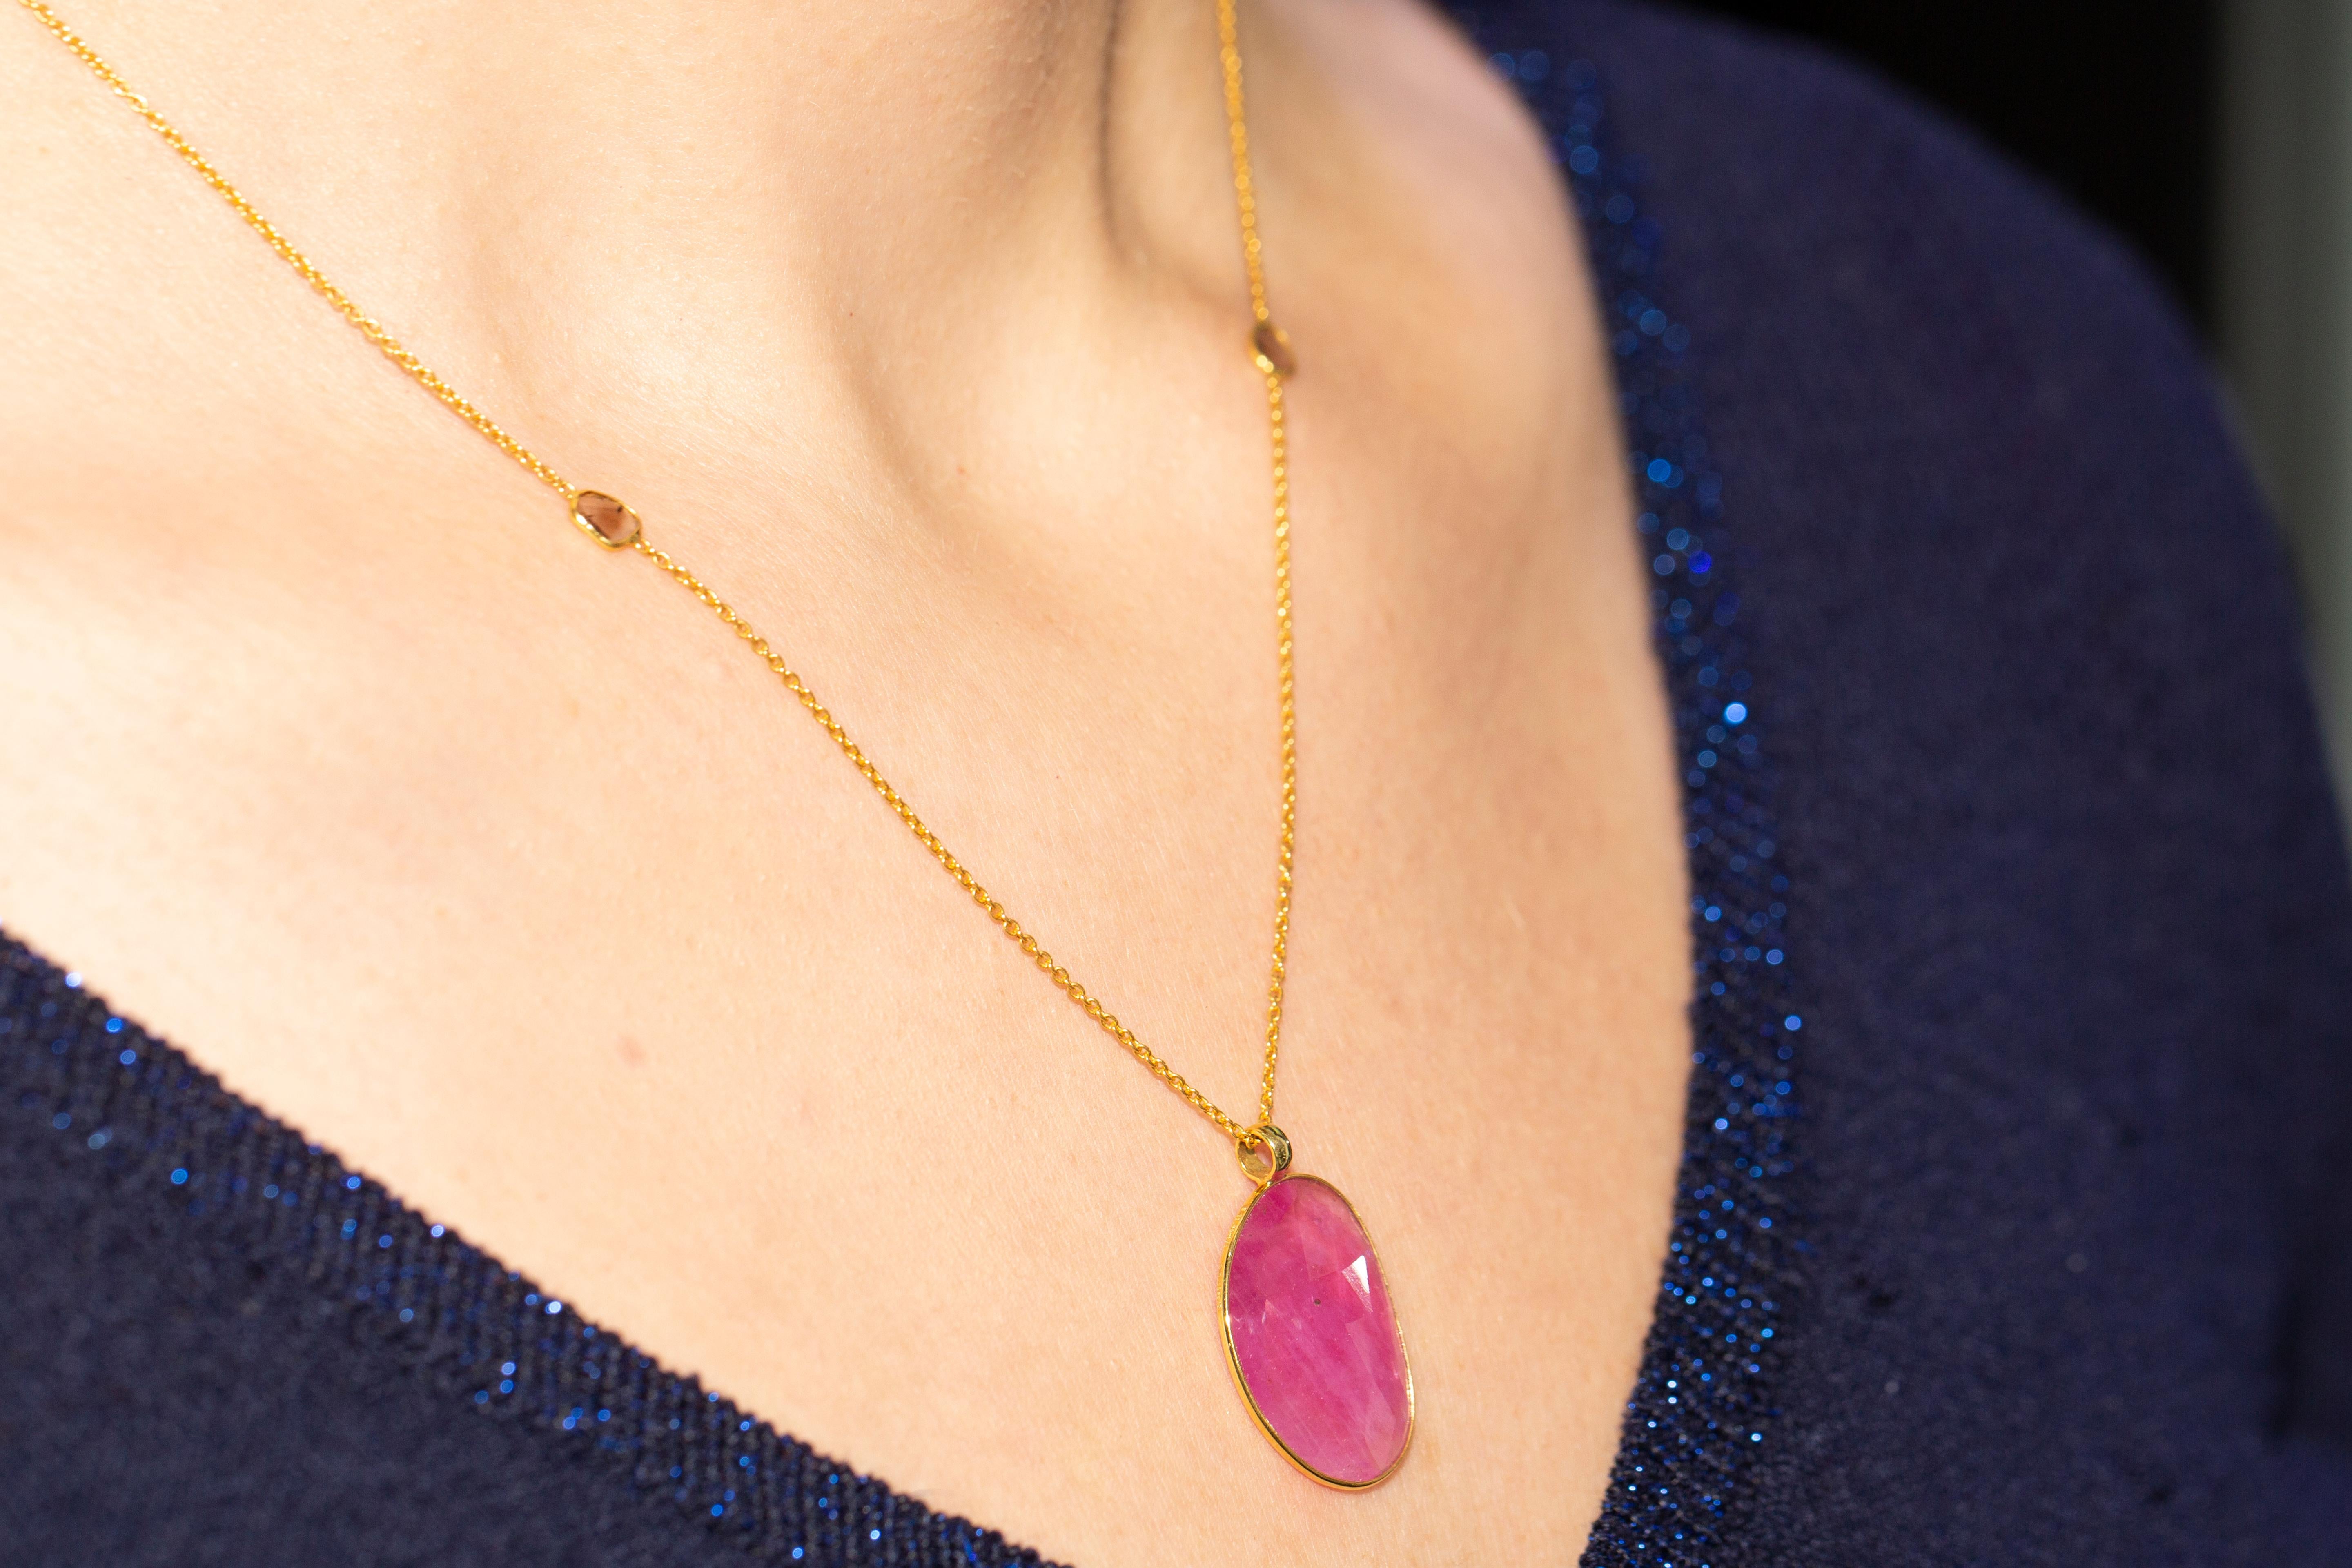 This stunning timelessly elegant rose cut 11.95 Carat Ruby from the Artisan collection is set in luxurious 18 Karat Yellow Gold chain featuring a total of 0.15 Carat Diamond slices. Each piece is hand made with a unique shaped precious stone in the